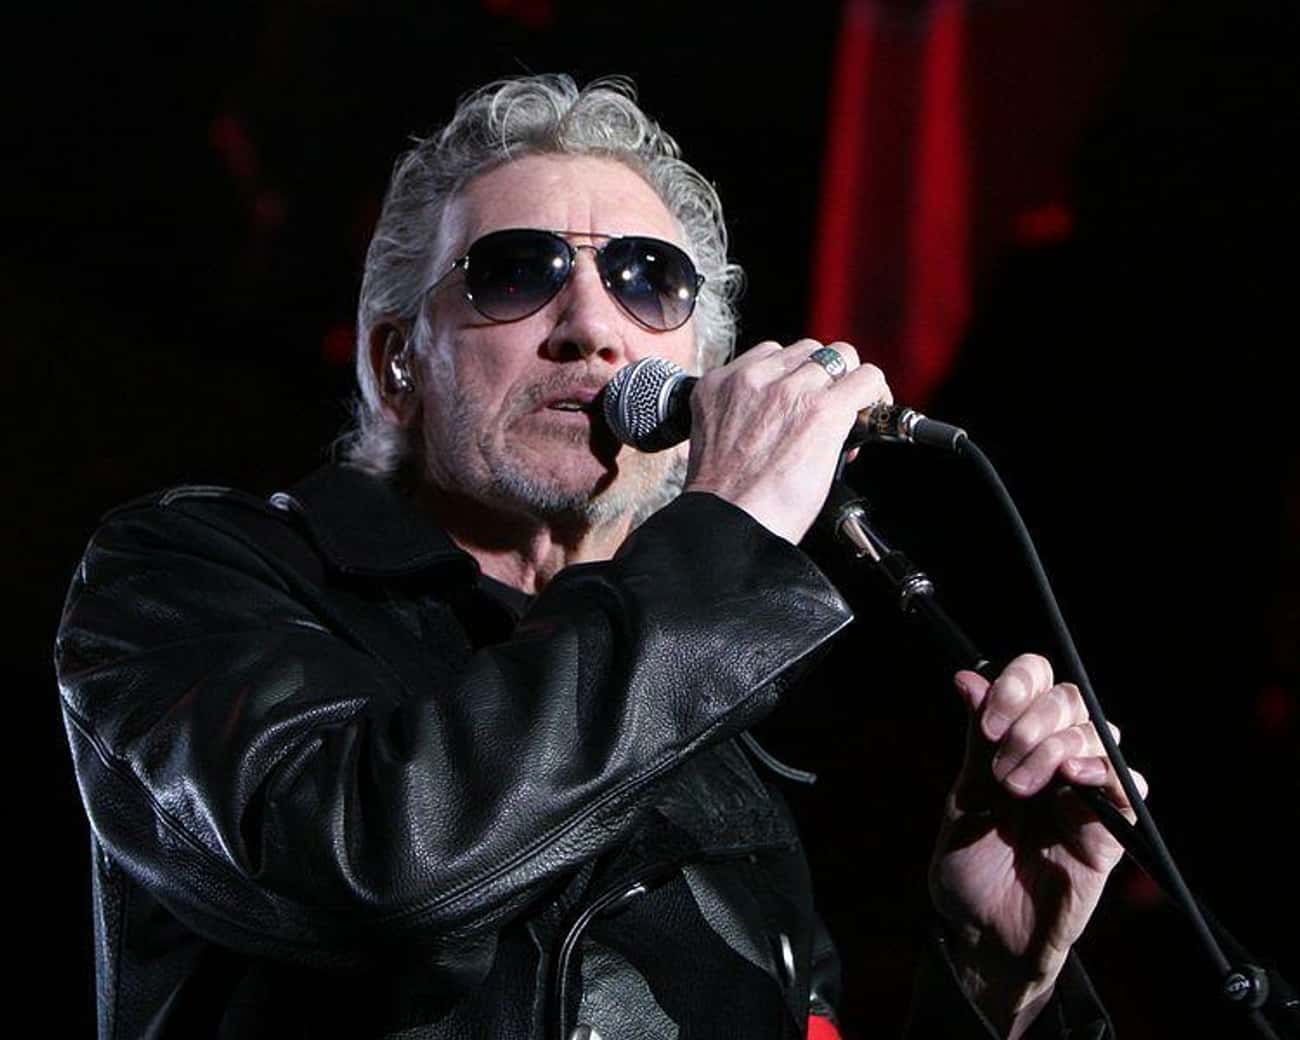 The Album's Story Is Heavily Based On Roger Waters's Life